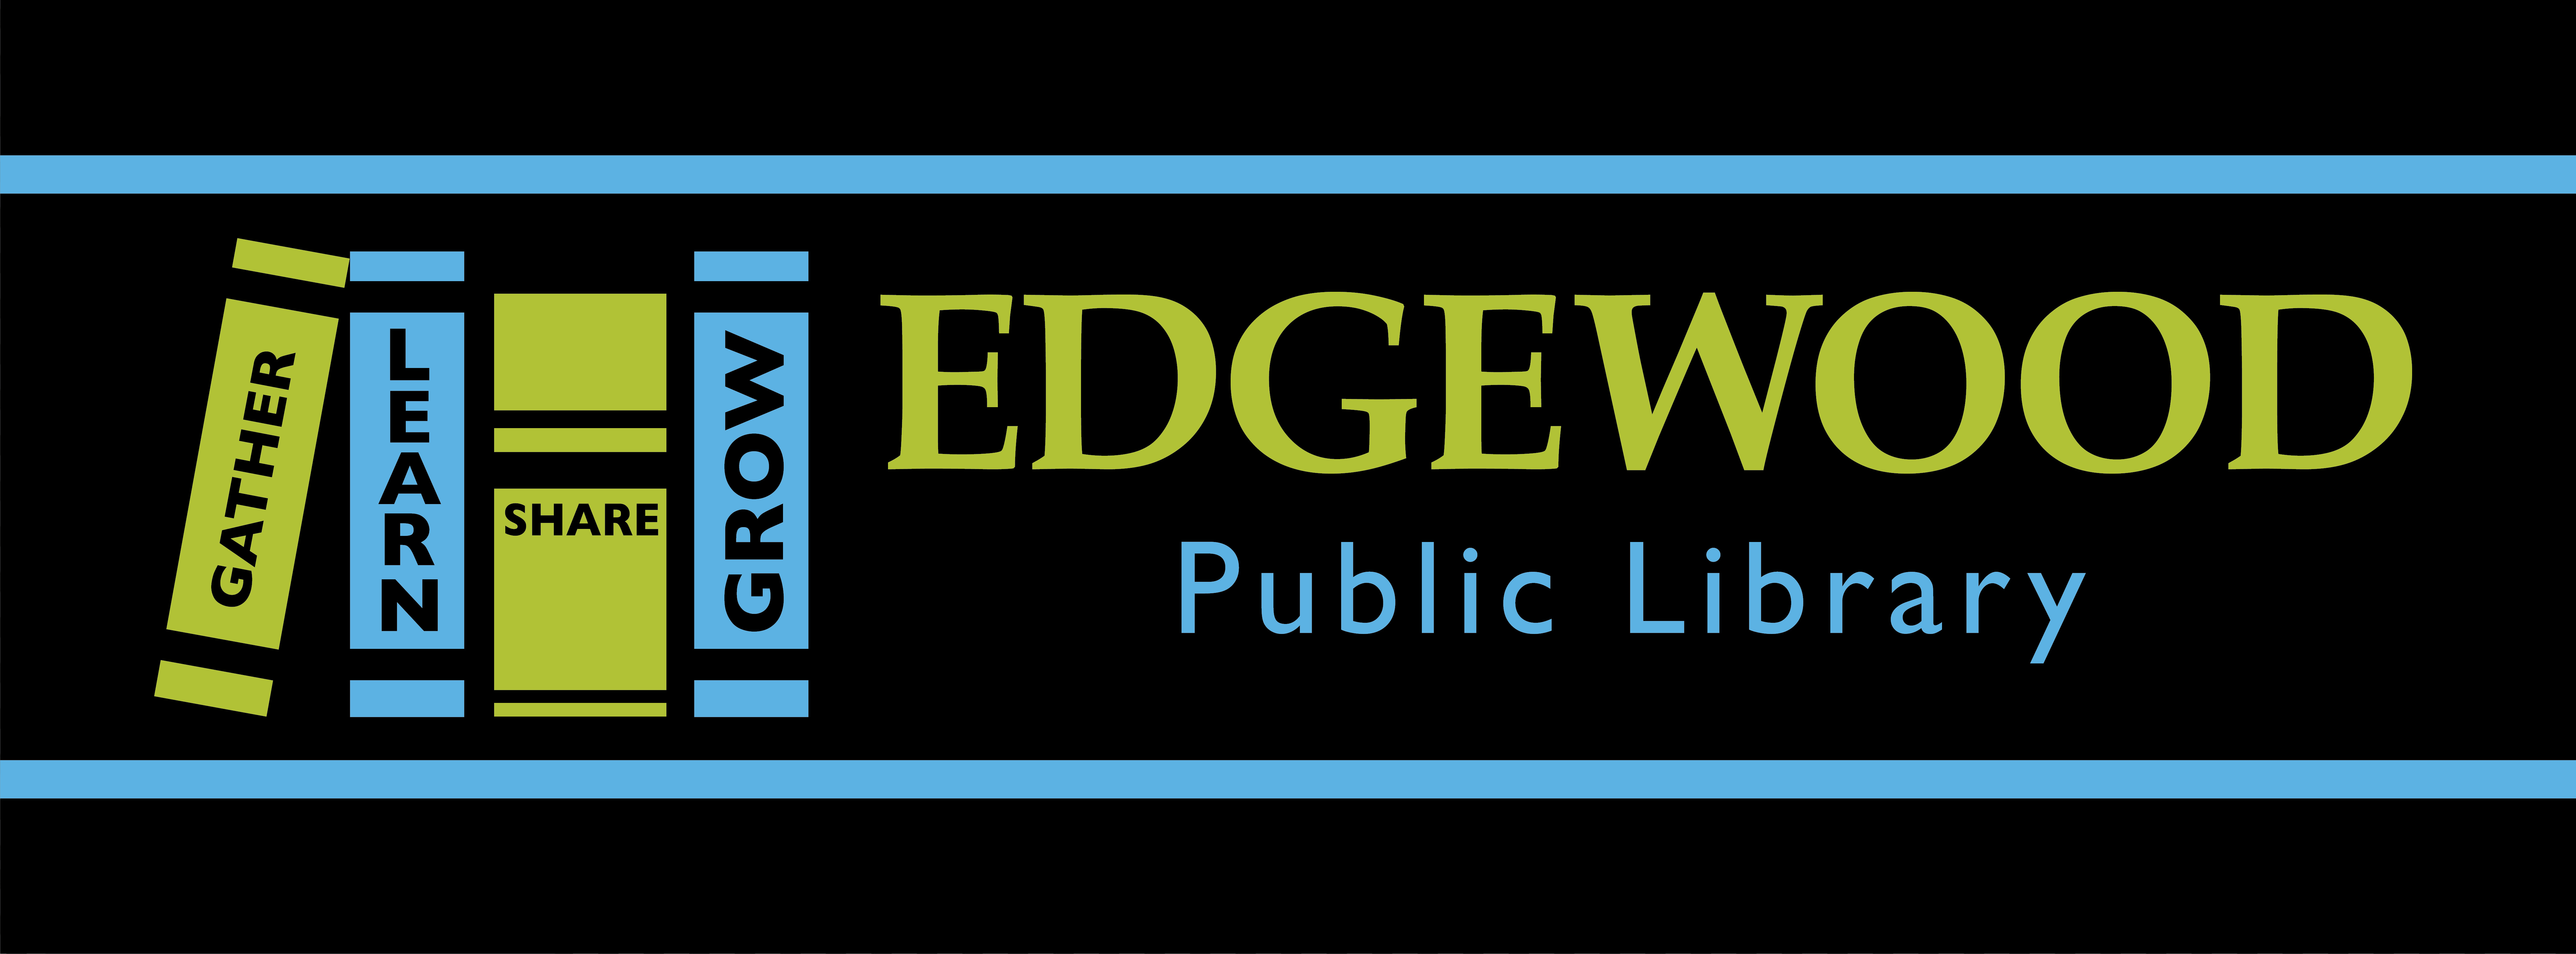 The Edgewood Public Library